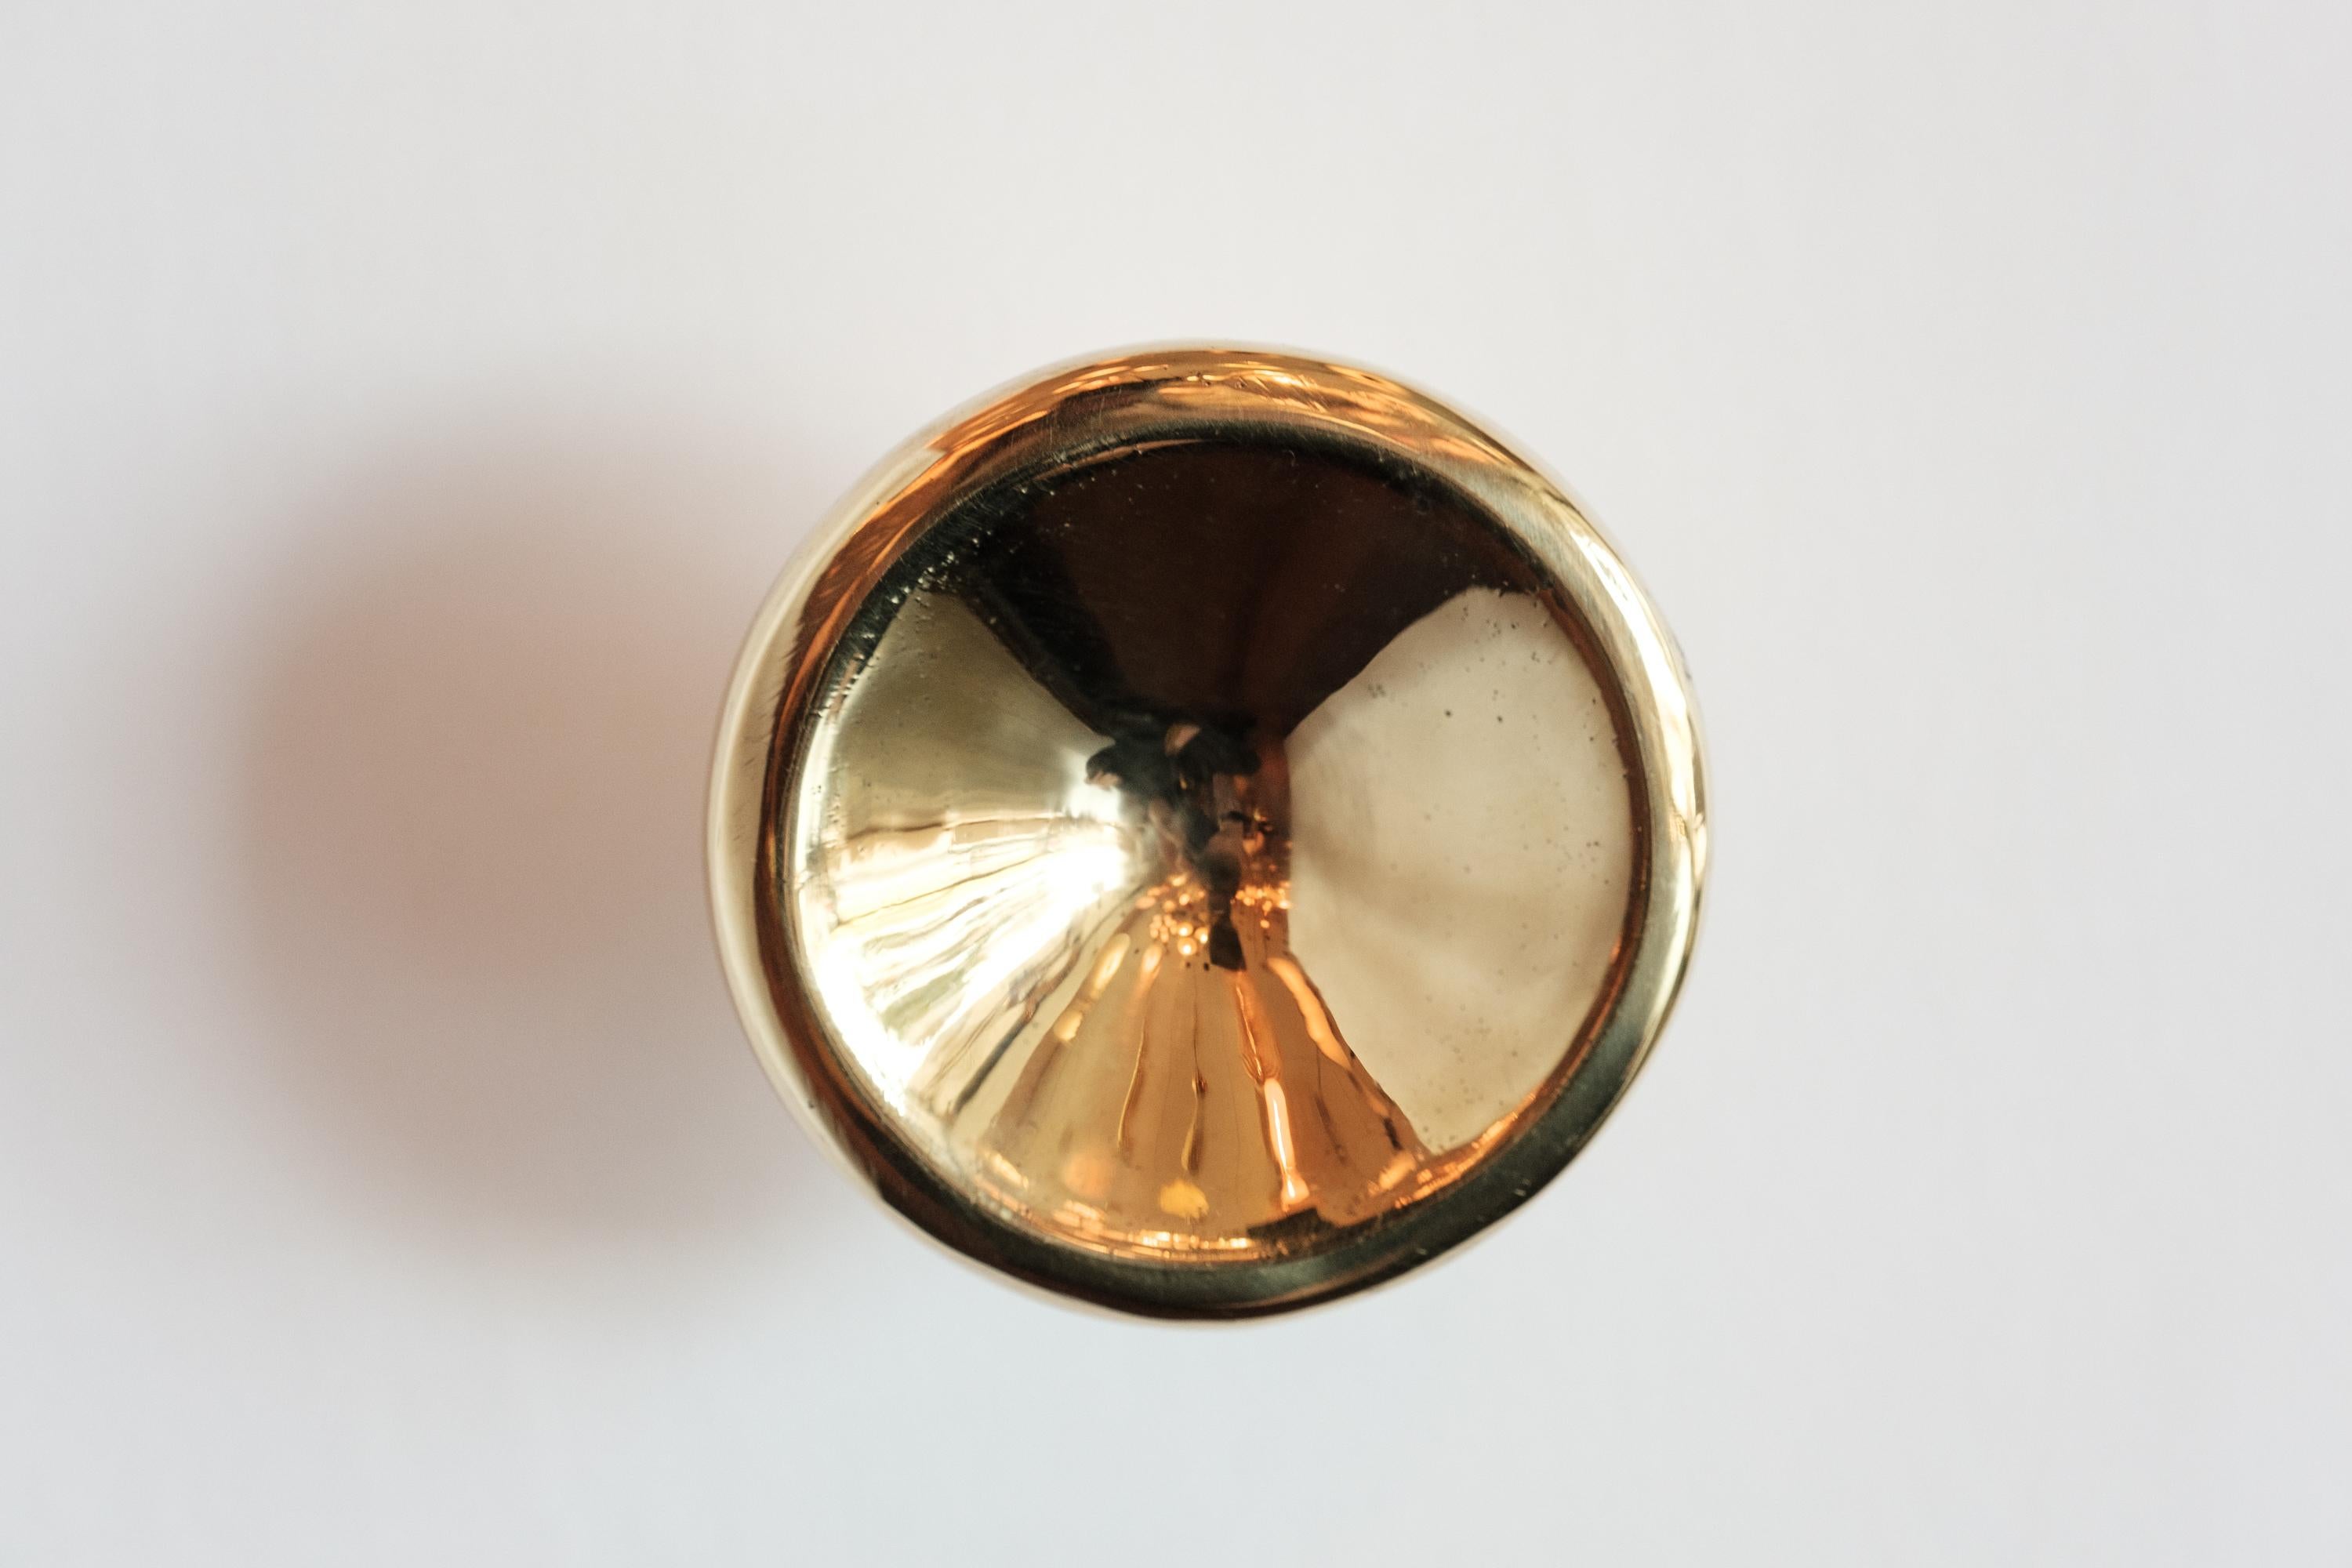 Carl Auböck Model #8040-1 polished brass knob.

Designed in the 1950s, this versatile and Minimalist Viennese knob is executed in polished brass by Werkstätte Carl Auböck, Austria. Its minimalist design combines clean form with